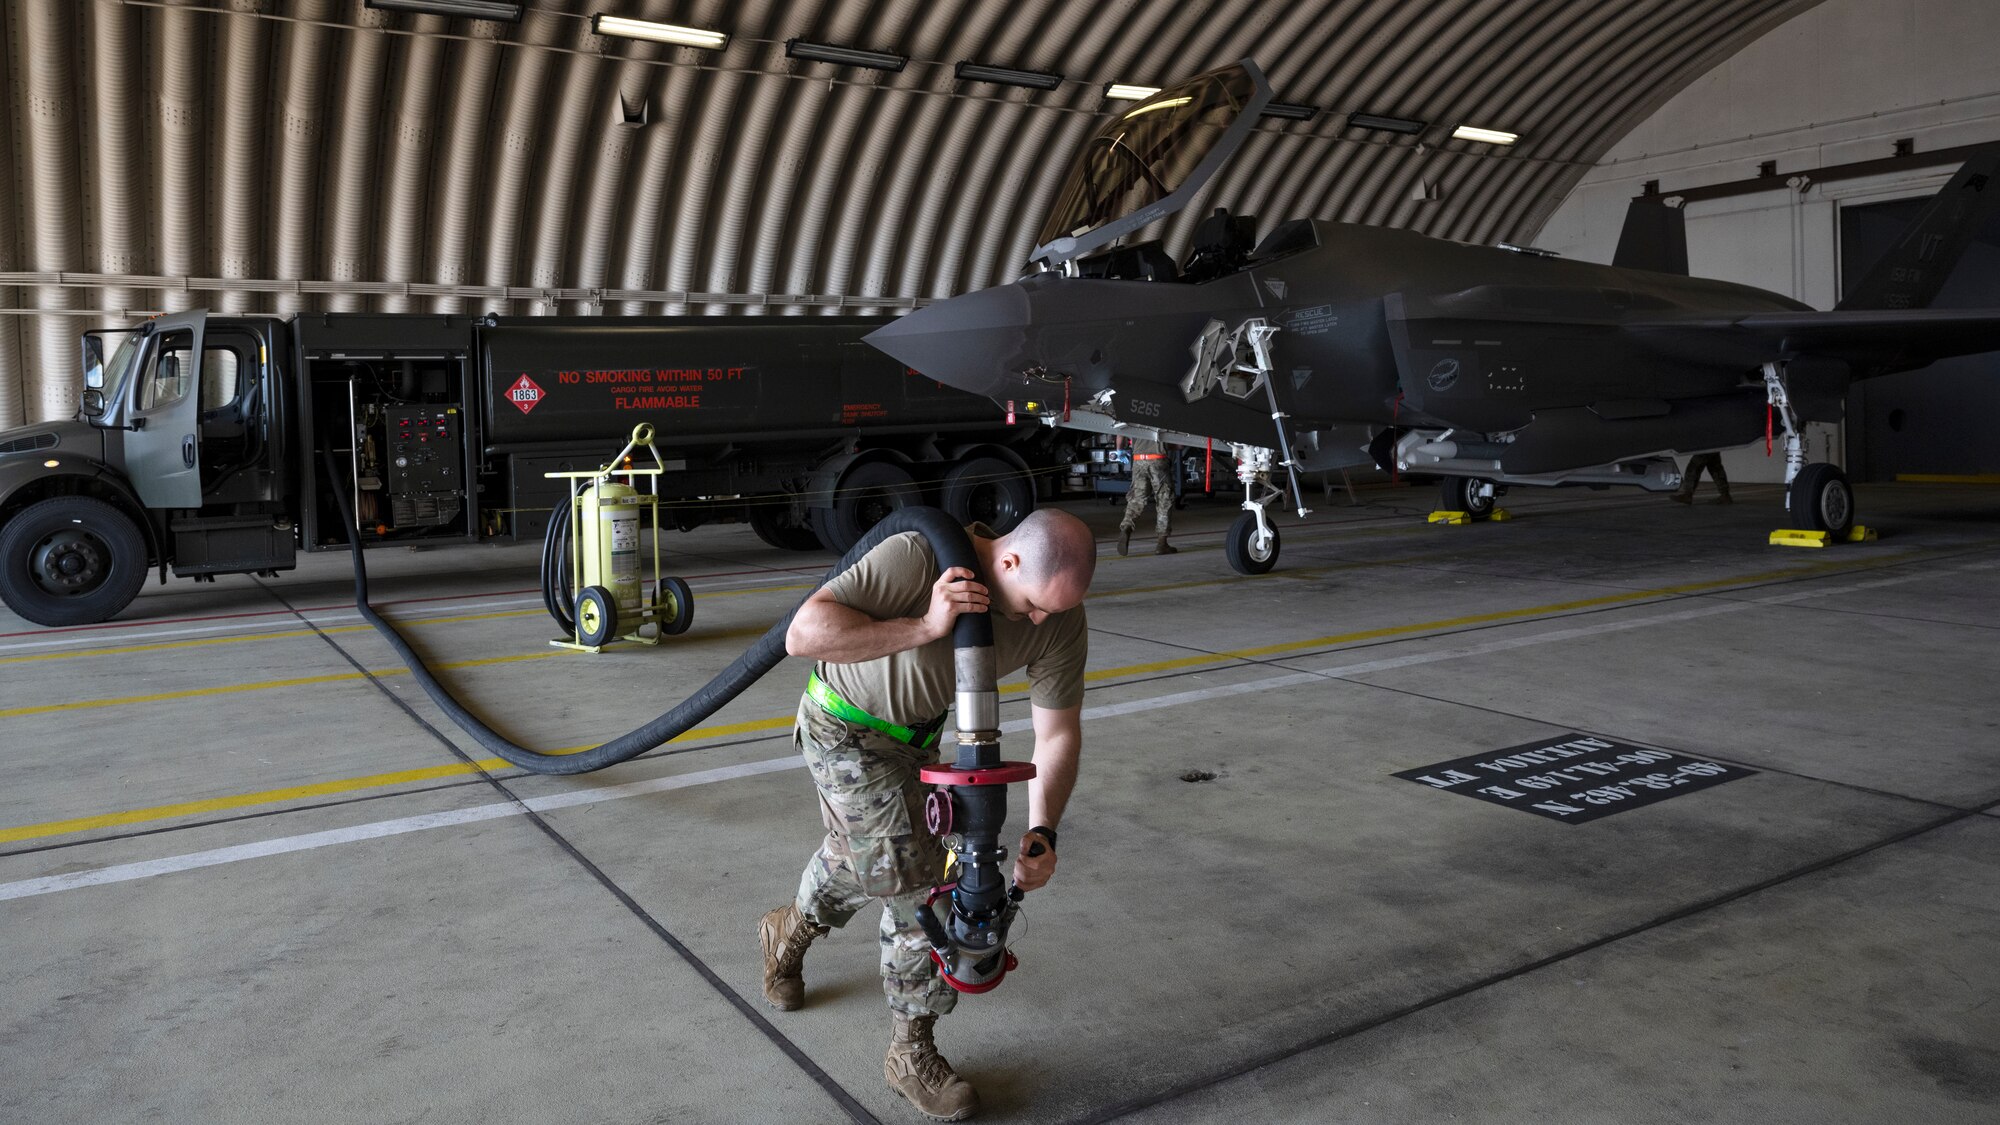 U.S. Air Force Staff Sgt. Devin Bonnett, 158th Fighter Wing, fuels distribution supervisor, unwinds the fuel hose from an R-11 truck prior to refueling an F-35A Lightning II aircraft at Spangdahlem Air Base, Germany, June 13, 2022. Airmen assigned to the Vermont Air National Guard are deployed to Europe to increase readiness and enhance NATO's collective defense. (U.S. Air Force photo by Tech. Sgt. Anthony Plyler)